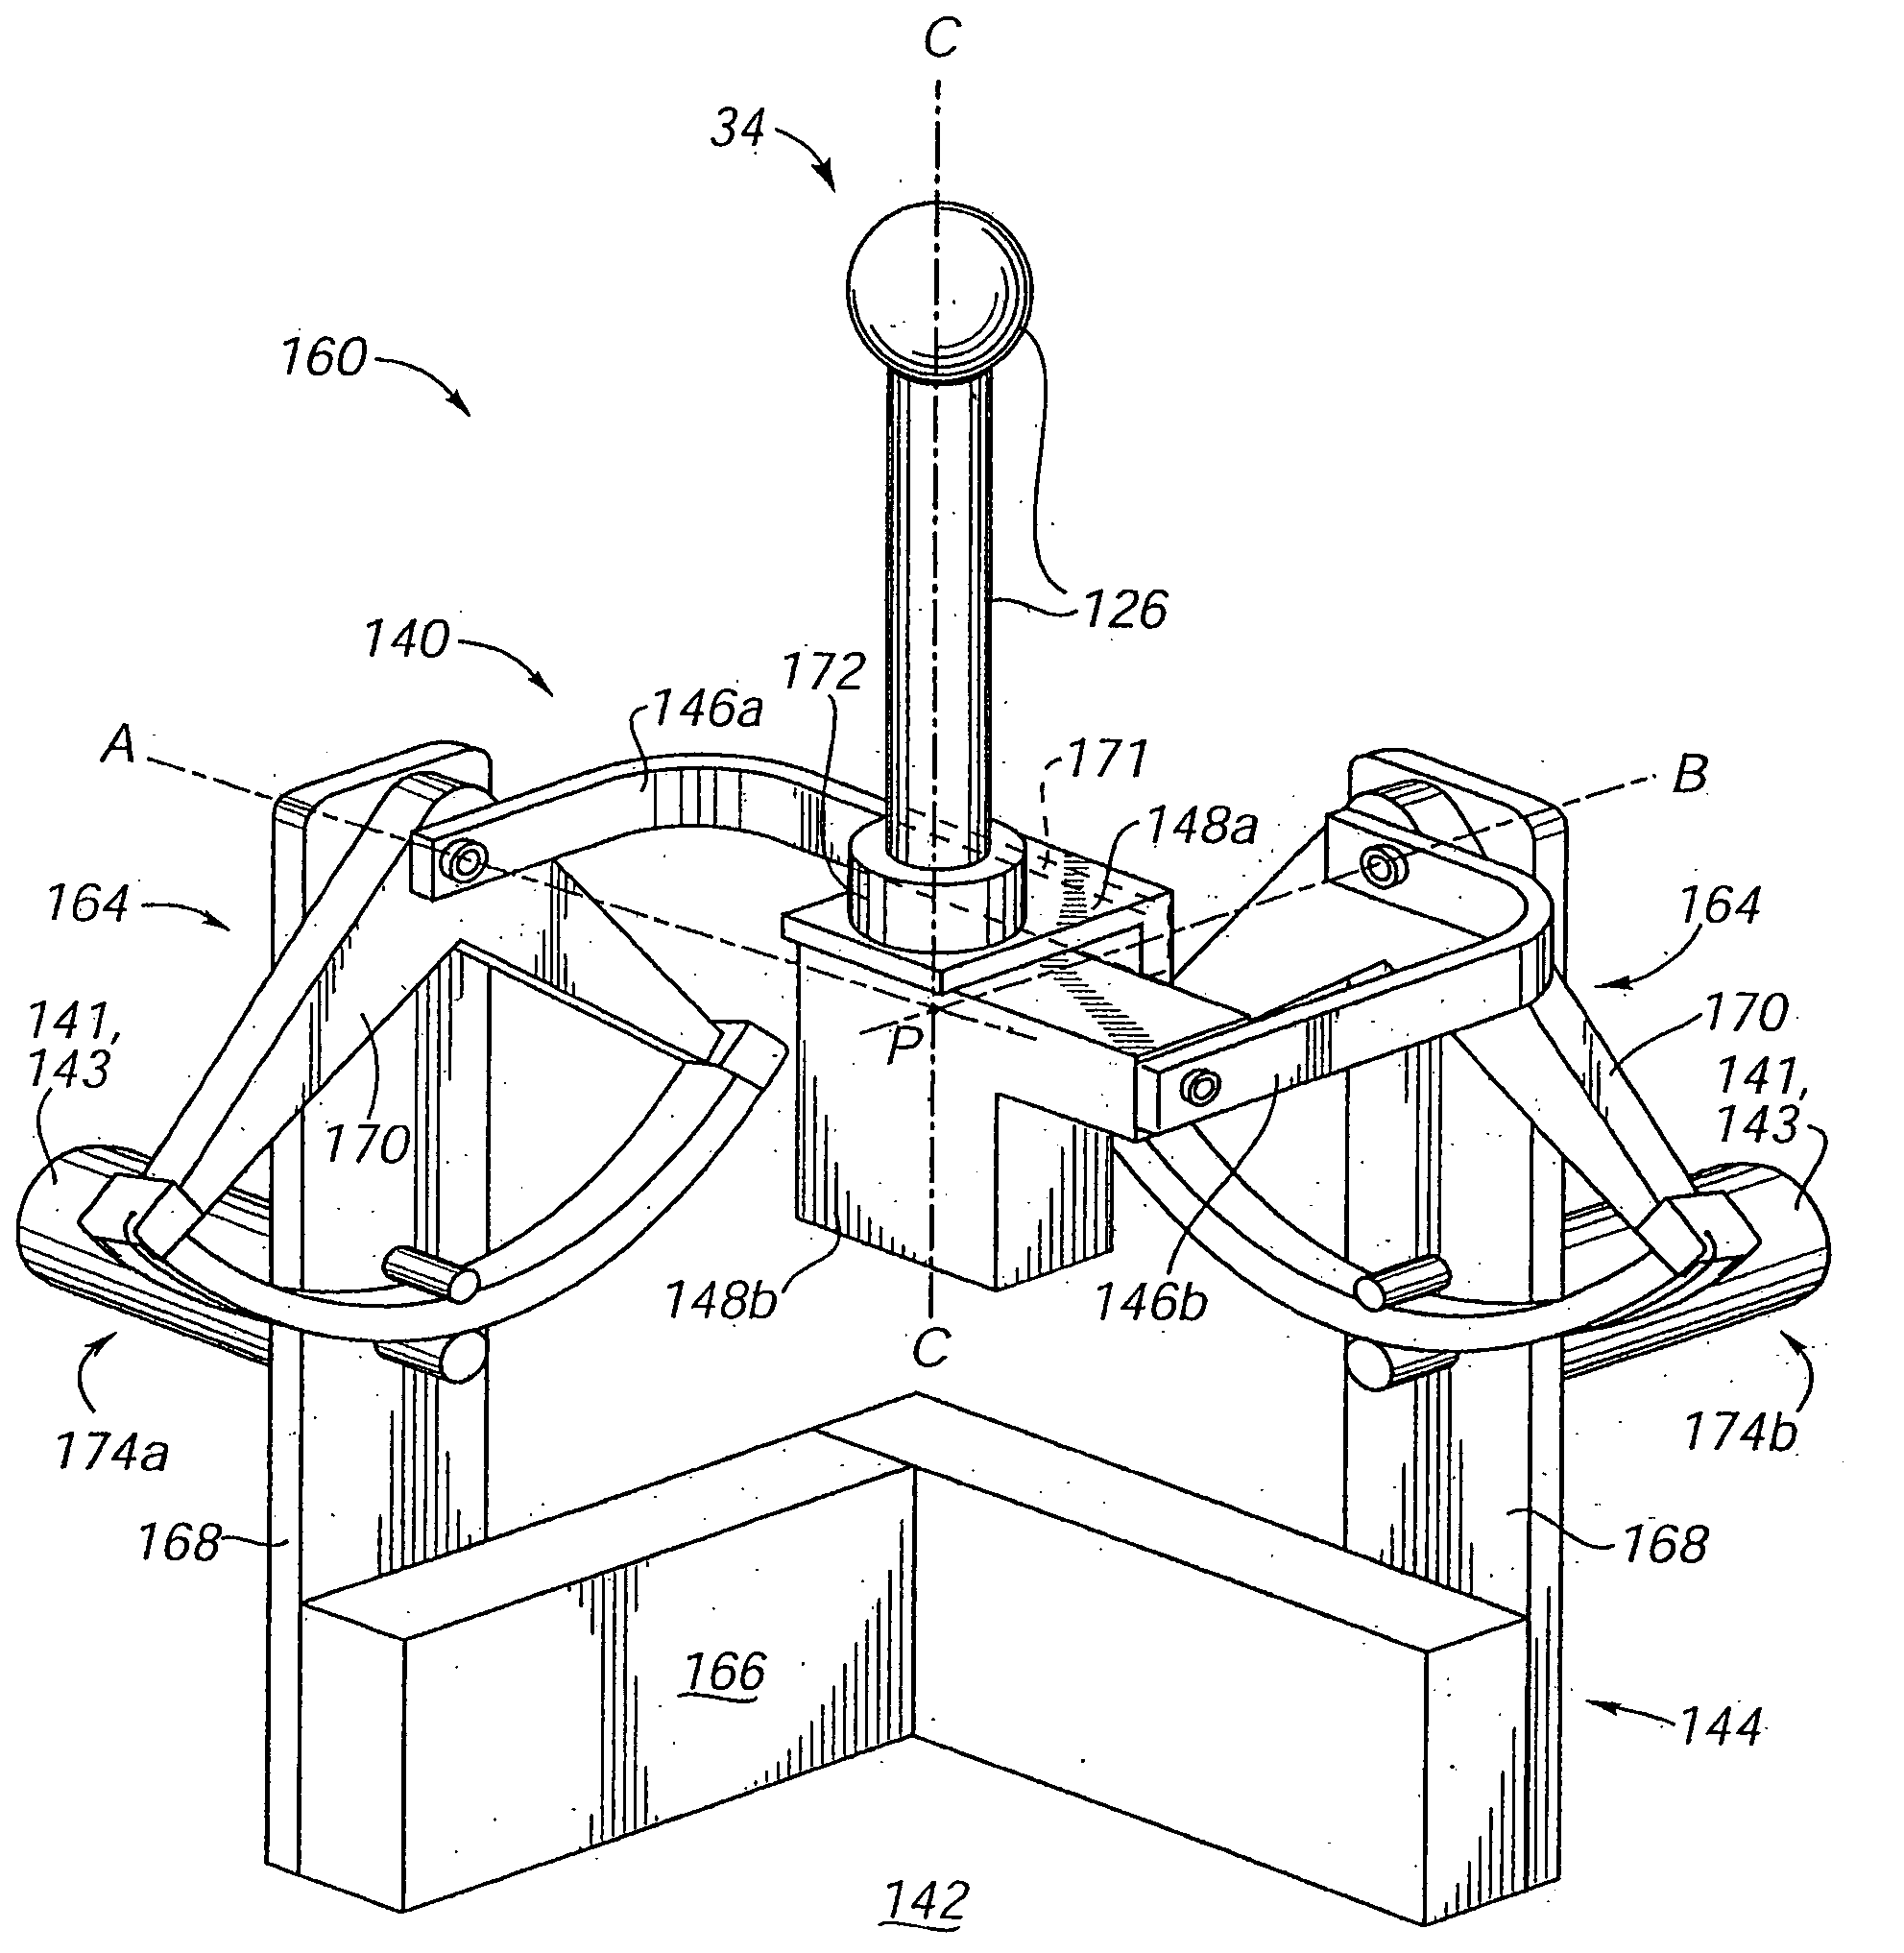 Method and apparatus for controlling force feedback interface systems utilizing a host computer